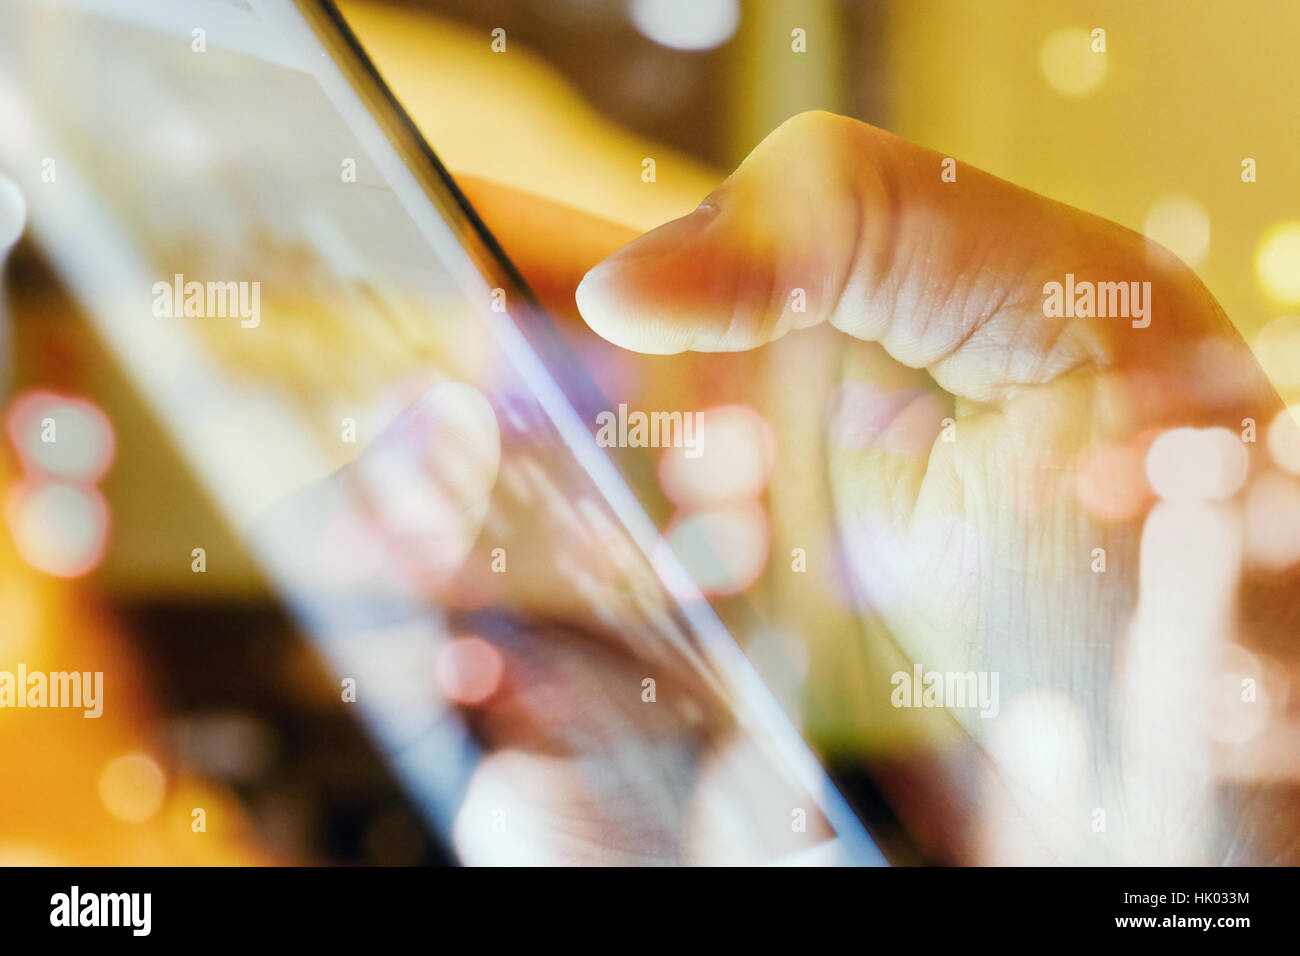 close up of Male fingers touching tablet screen double exposure and defocused city night light background. Stock Photo